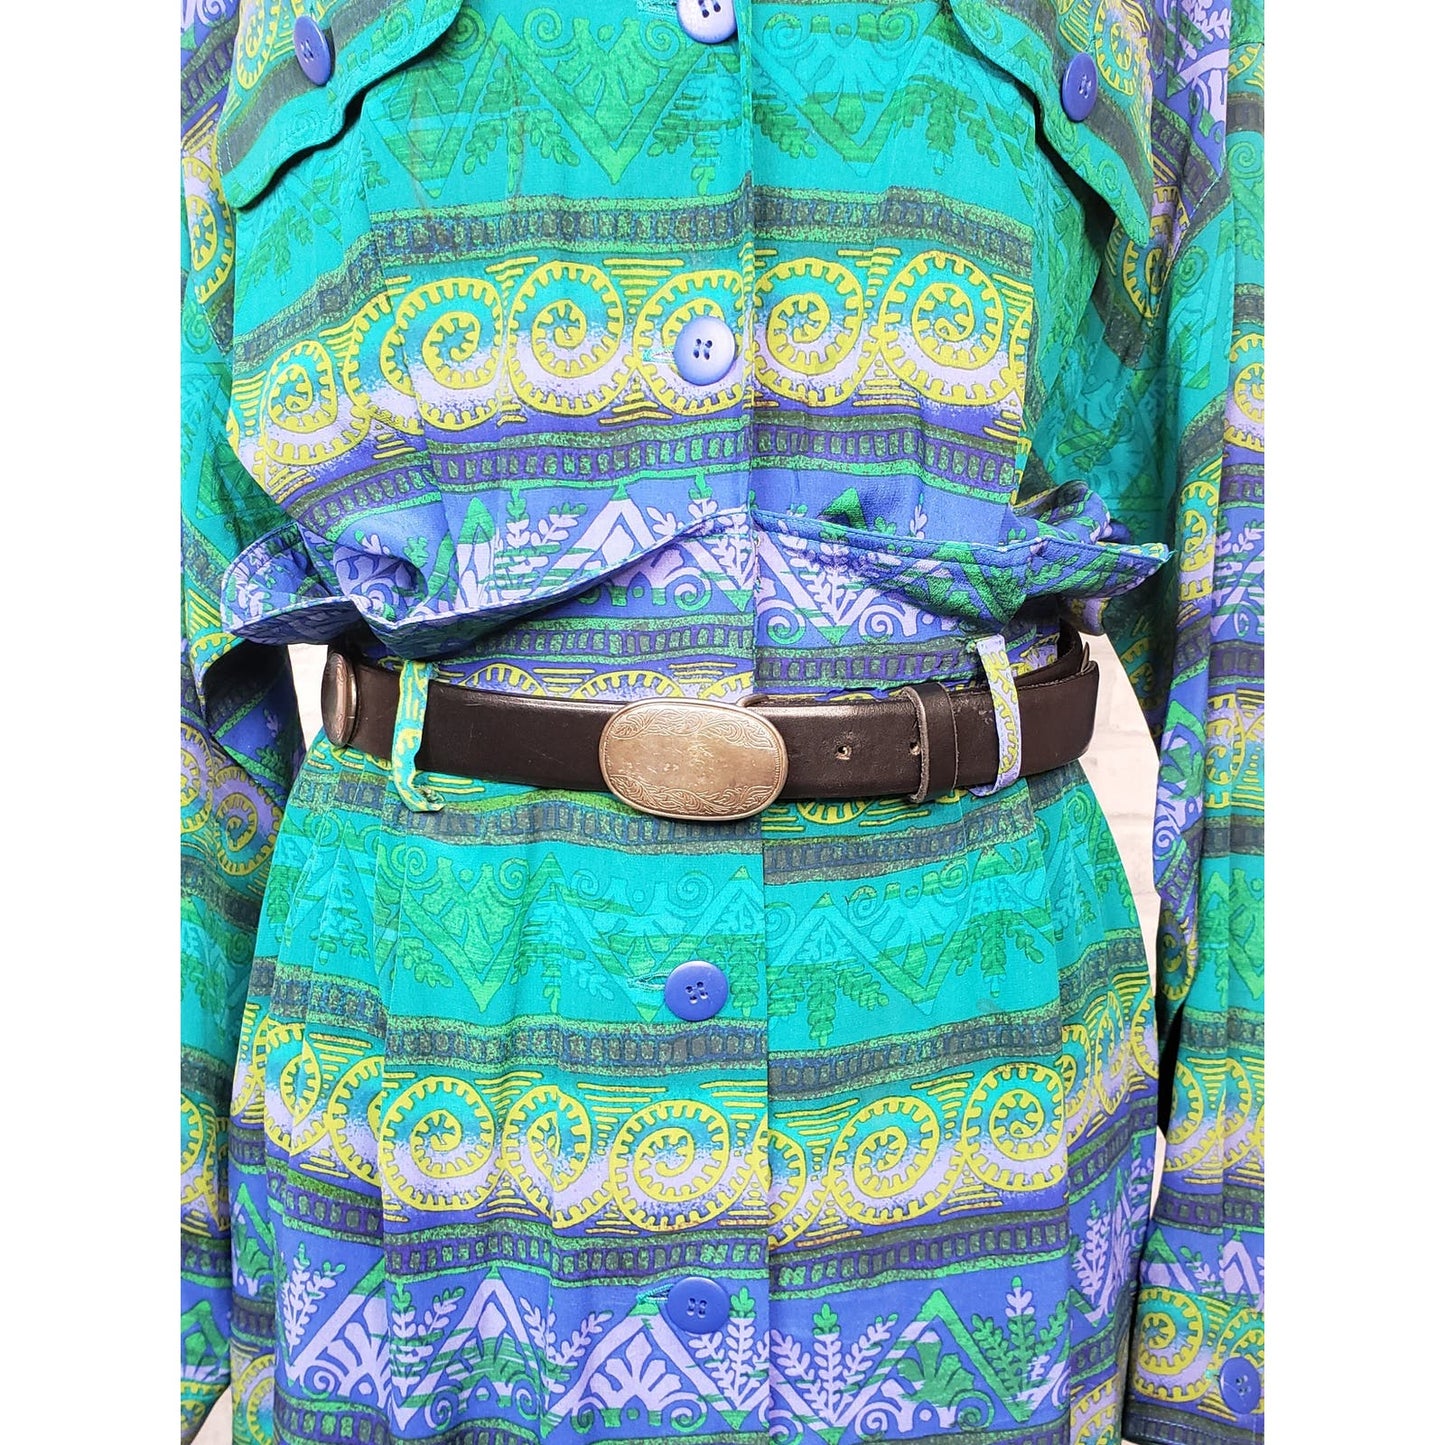 Silk shirt dress with paper-bag waist size 14 teal blue, green and purple, black Italian leather belt included,